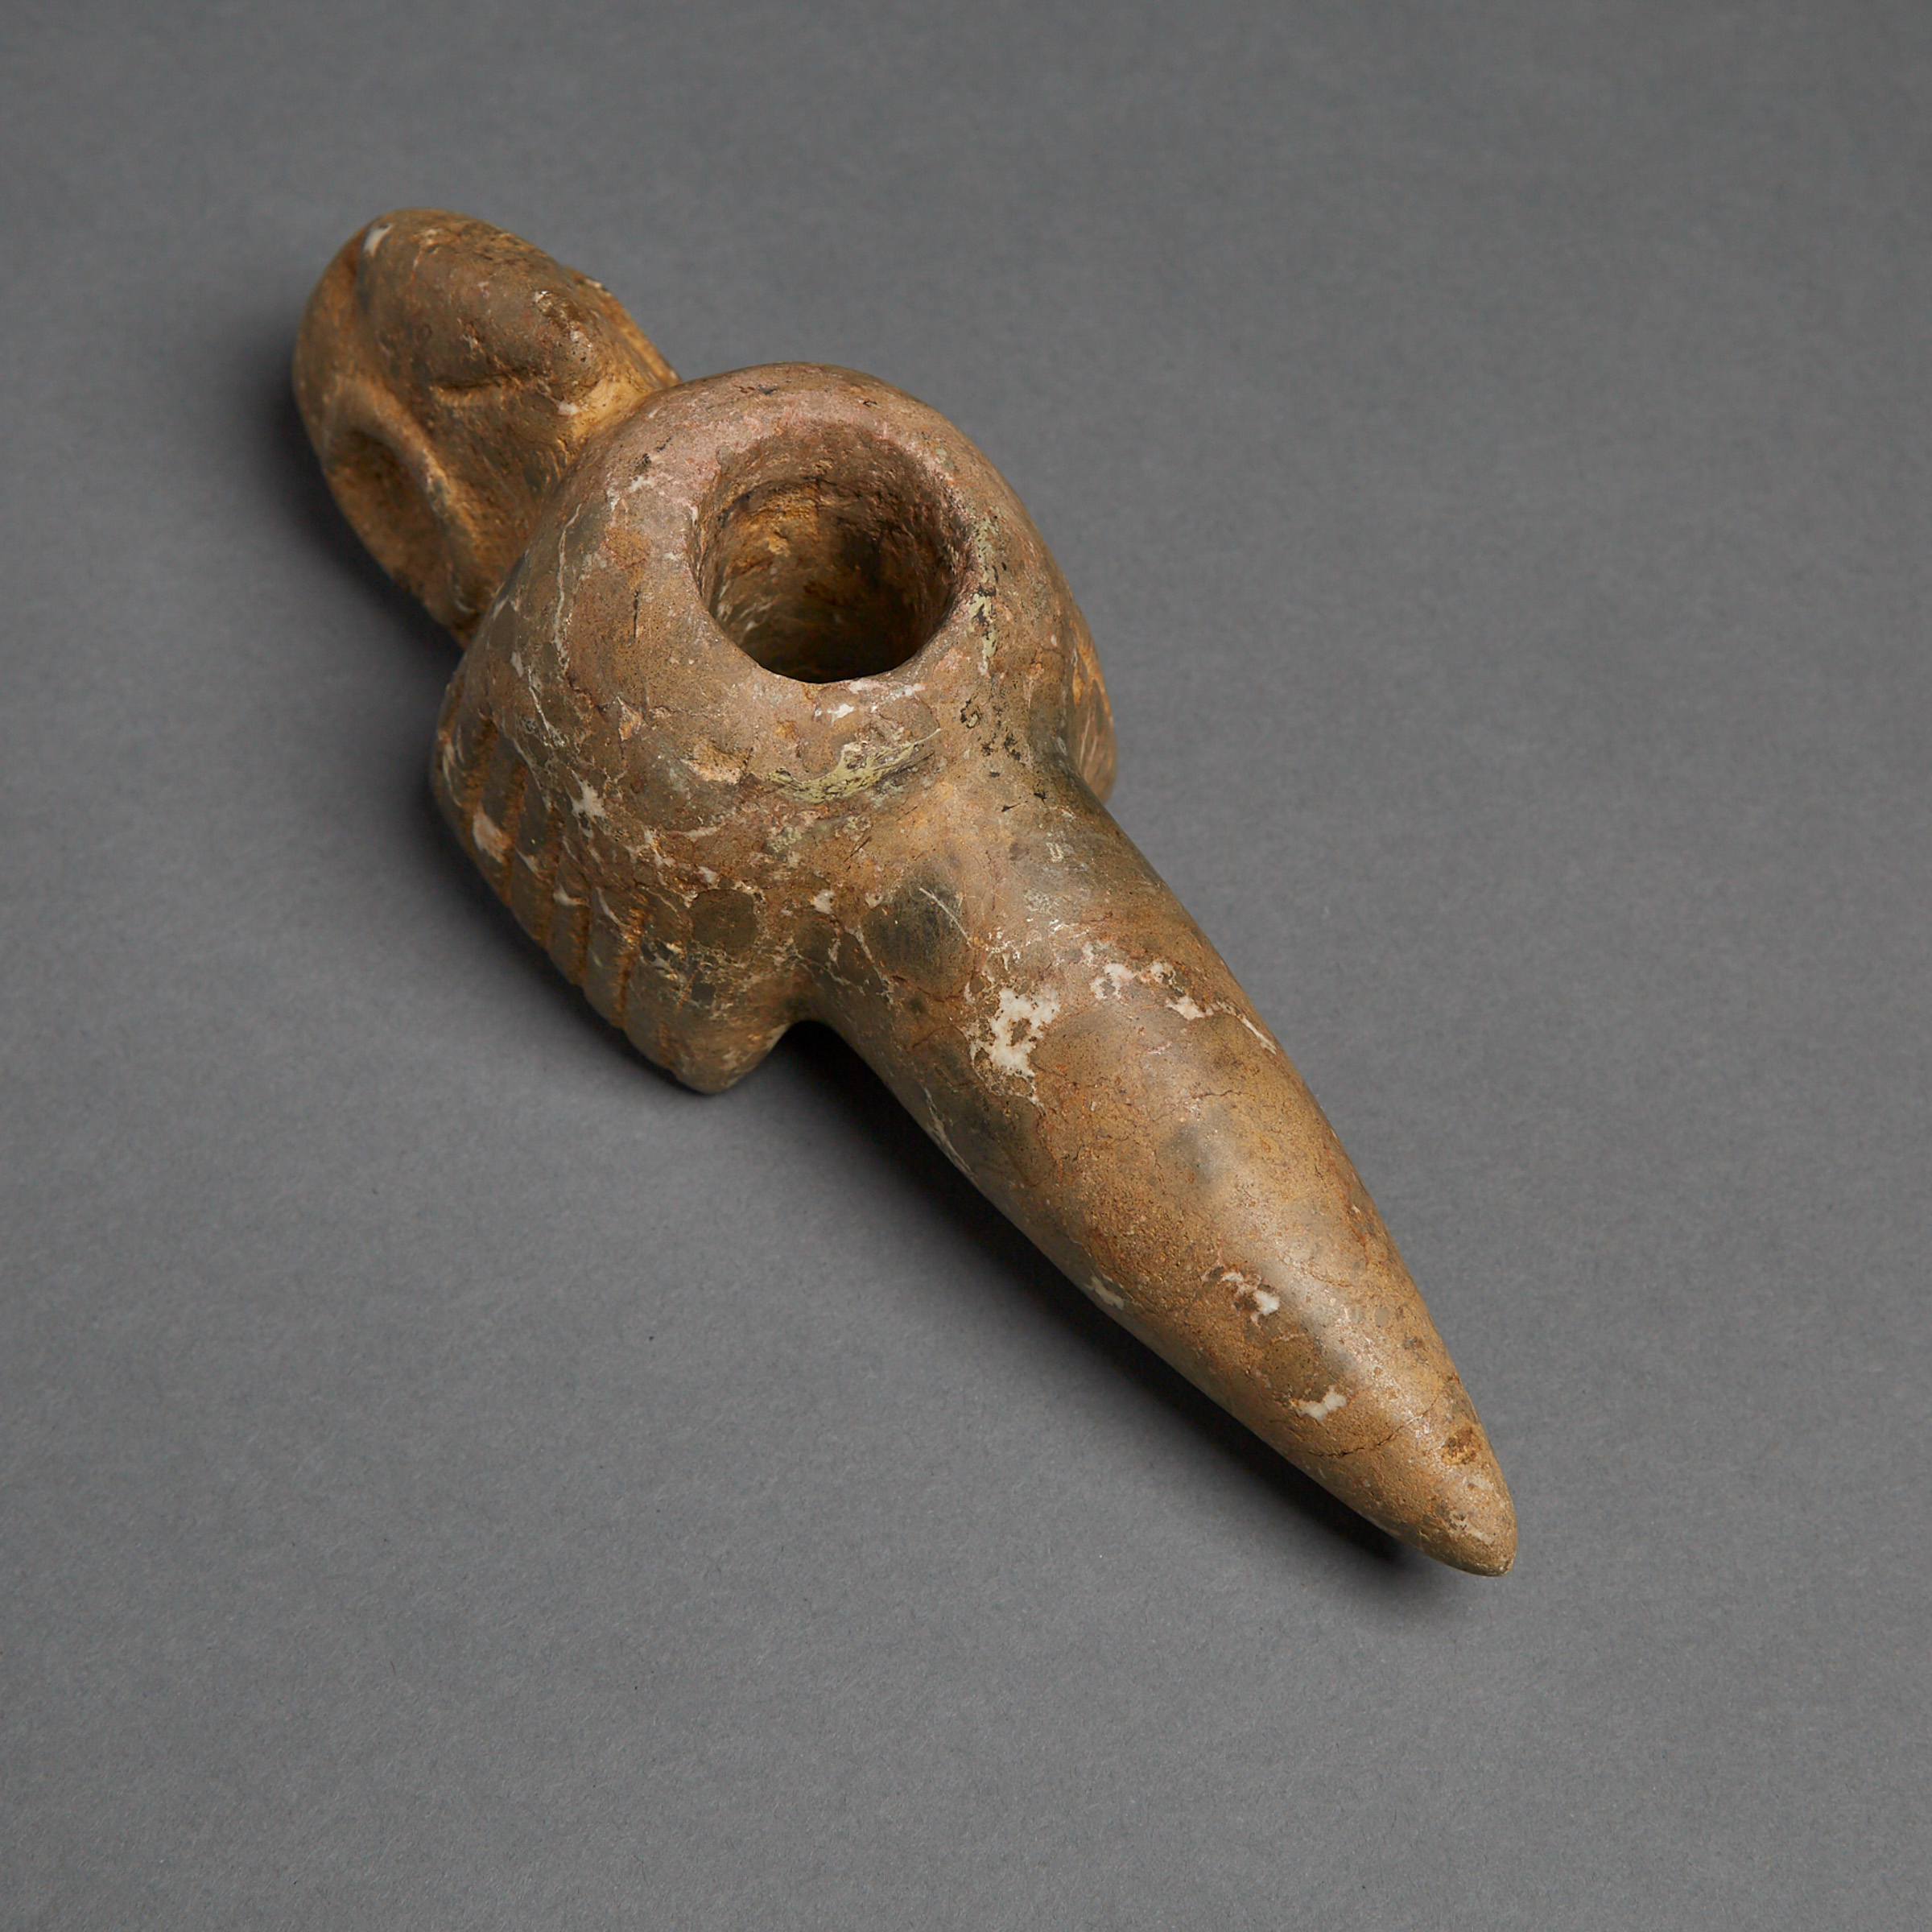 Taino Parrot Form Ceremonial Stone Axe Scepter Head, 1200-1500 A.D.